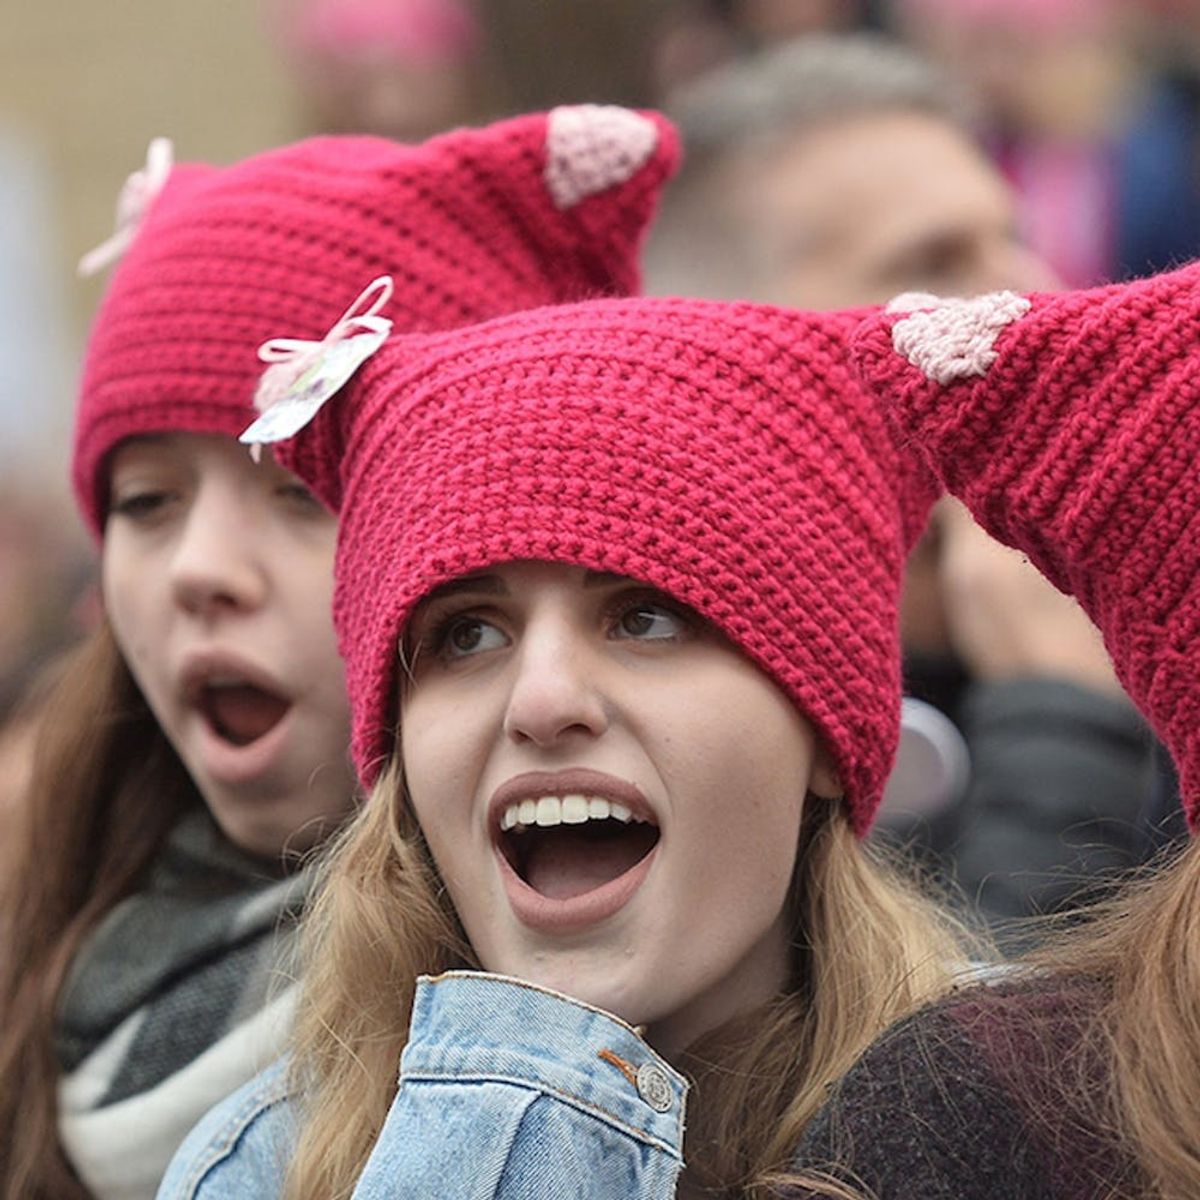 The Pussyhat Just Made the Cover of  TIME Magazine